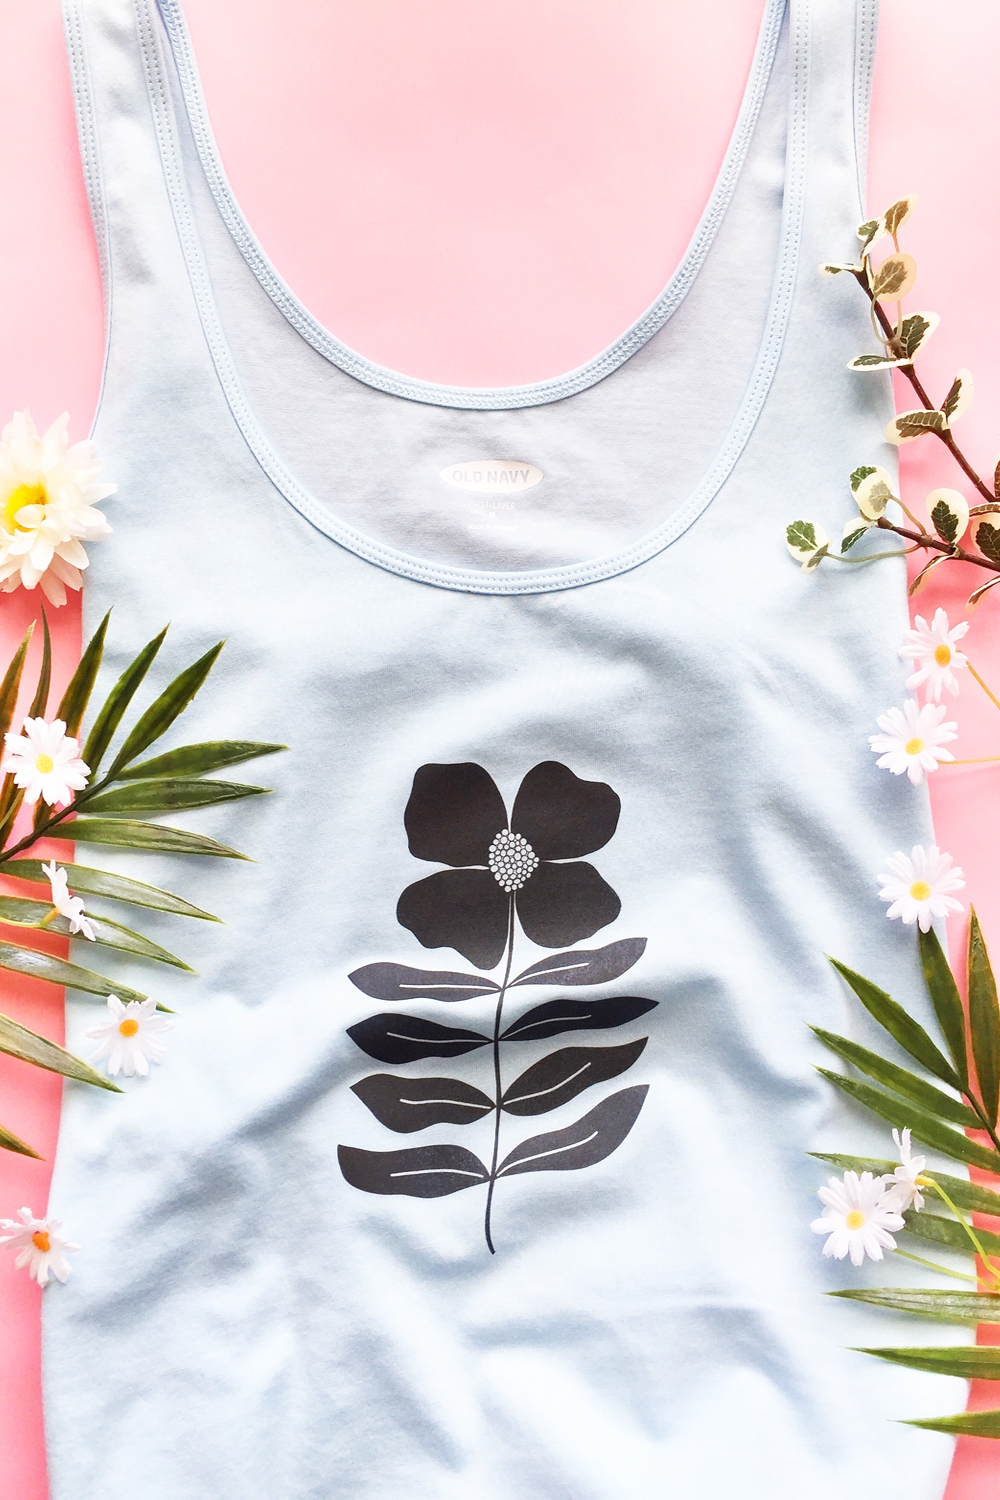 How To Make A DIY Flower Tank Top - This tutorial on Maritza Lisa will show you how to customize a tank with a flower image